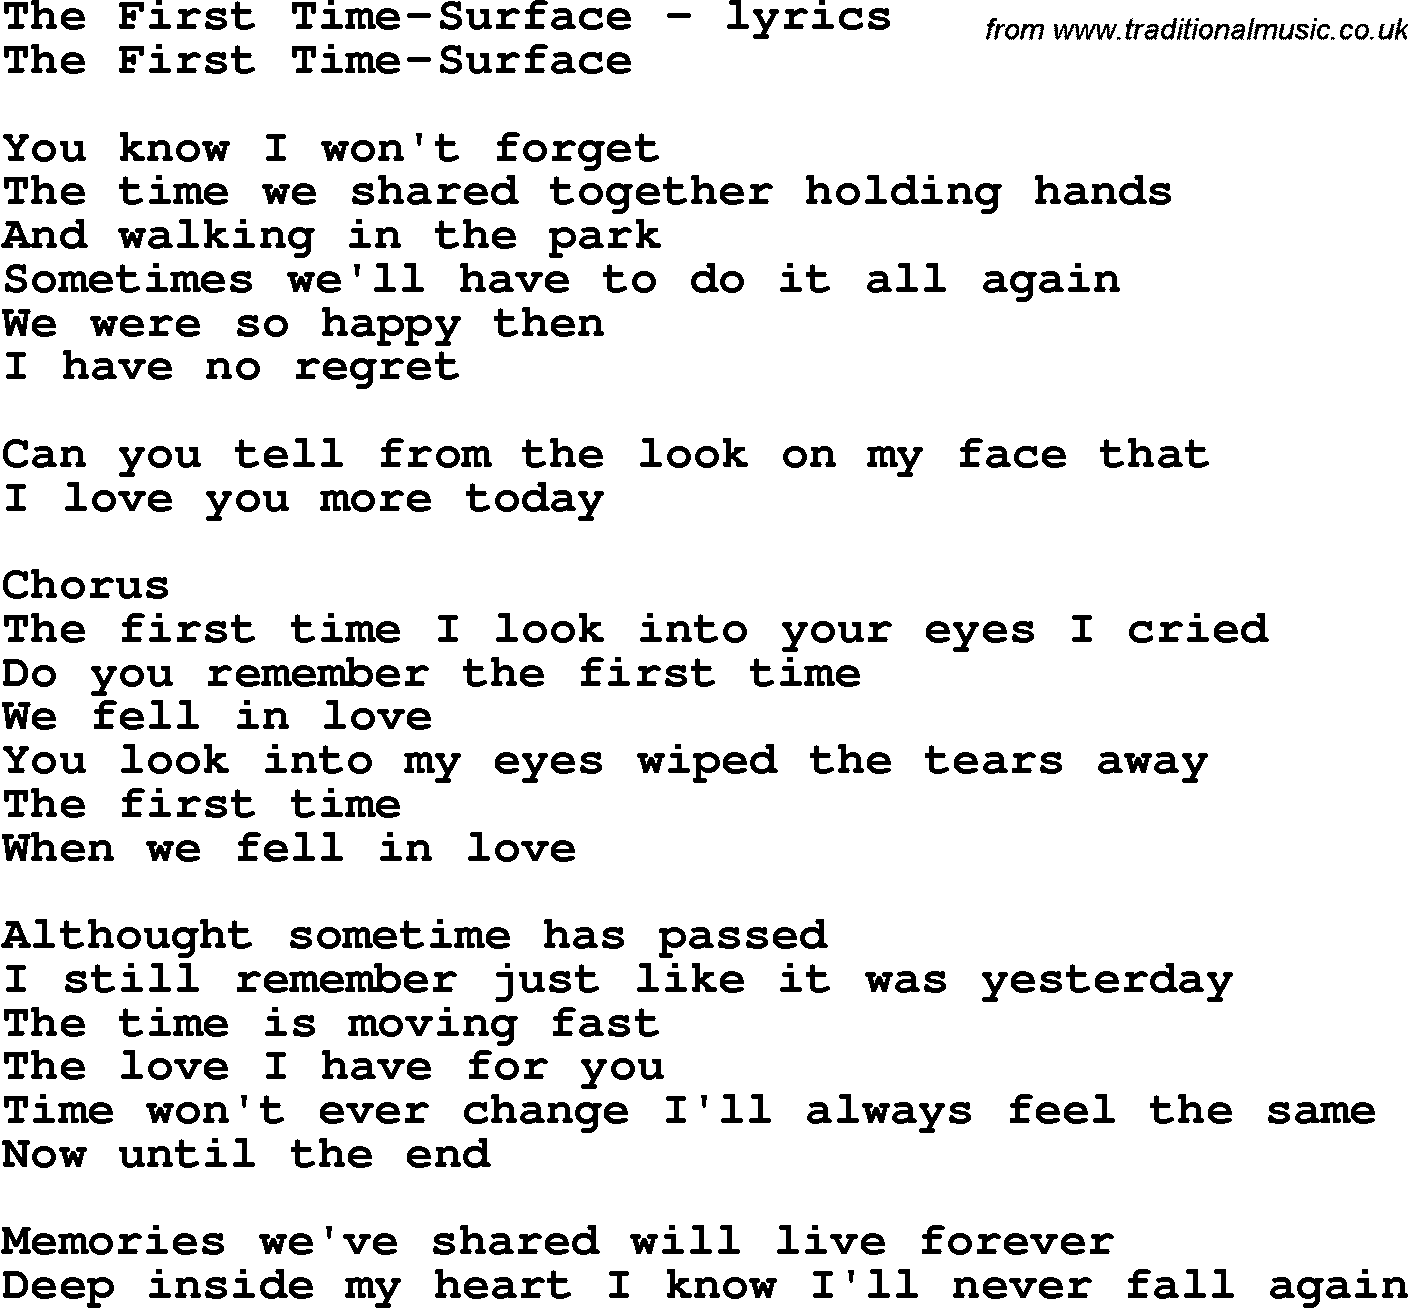 Love Song Lyrics for: The First Time-Surface